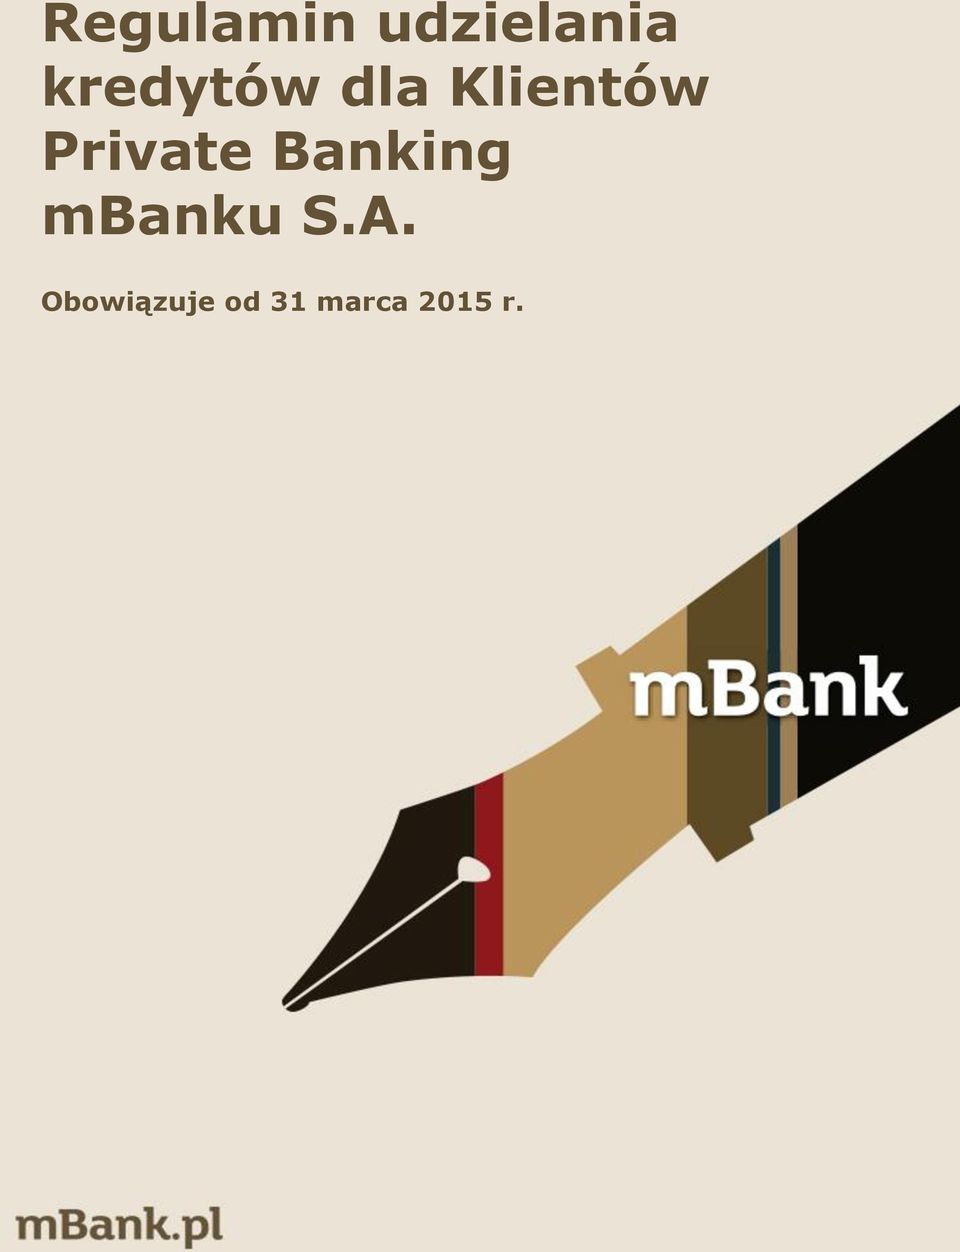 Private Banking mbanku S.